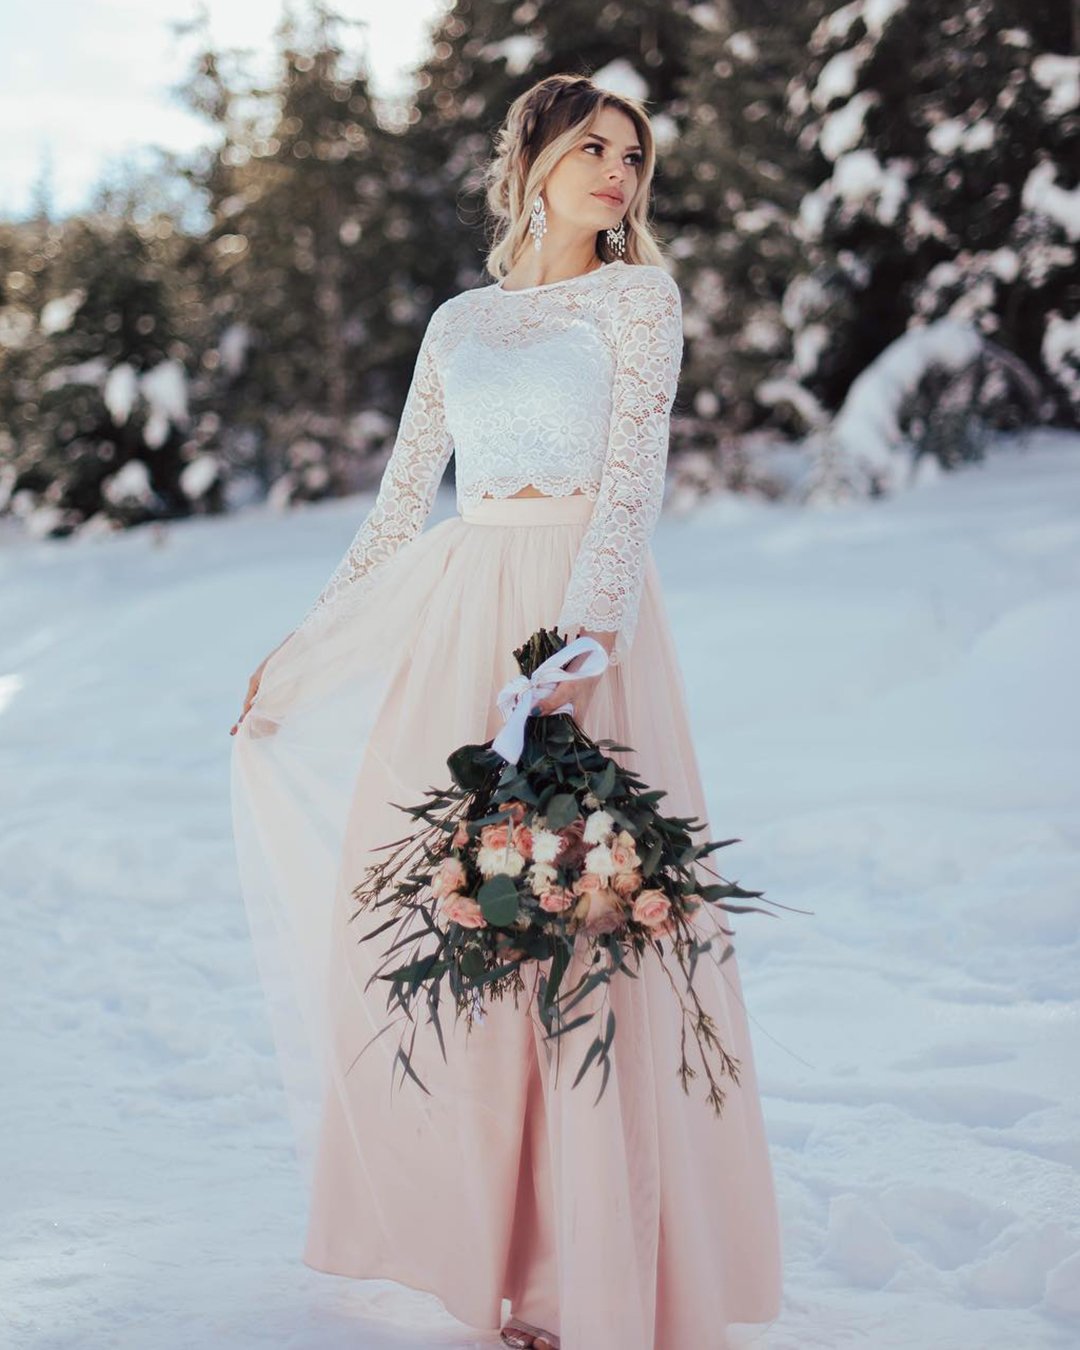 winter wedding dresses outfits with long sleeves lace top tulle skirt blisstulle